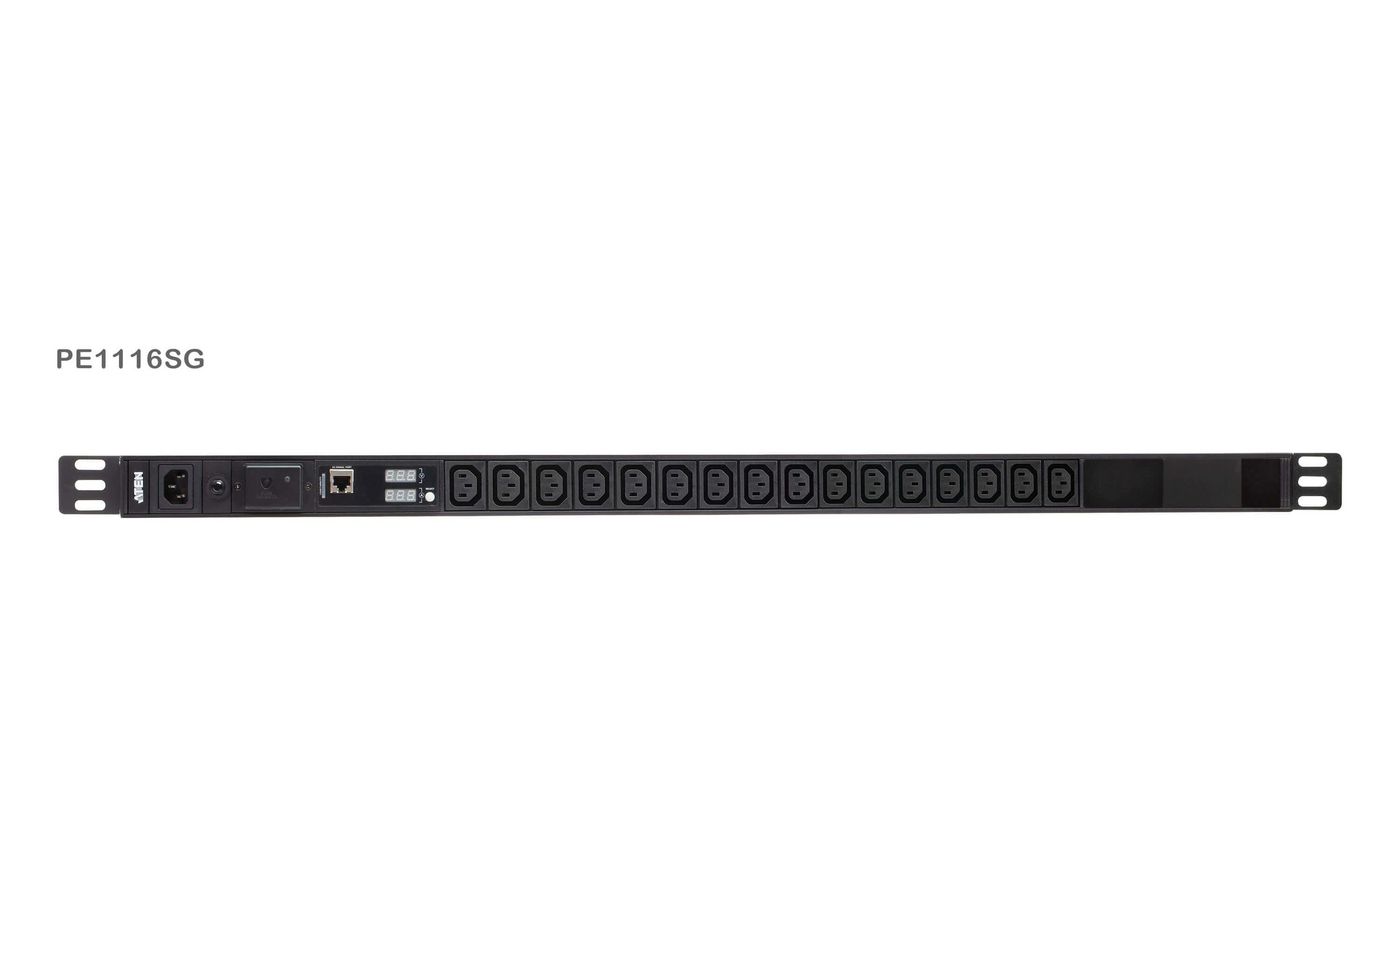 16-outlet 0u Pdu With Current & VoltageLCD Display Overcurrent And Surge Protection (10a) (16x C13)